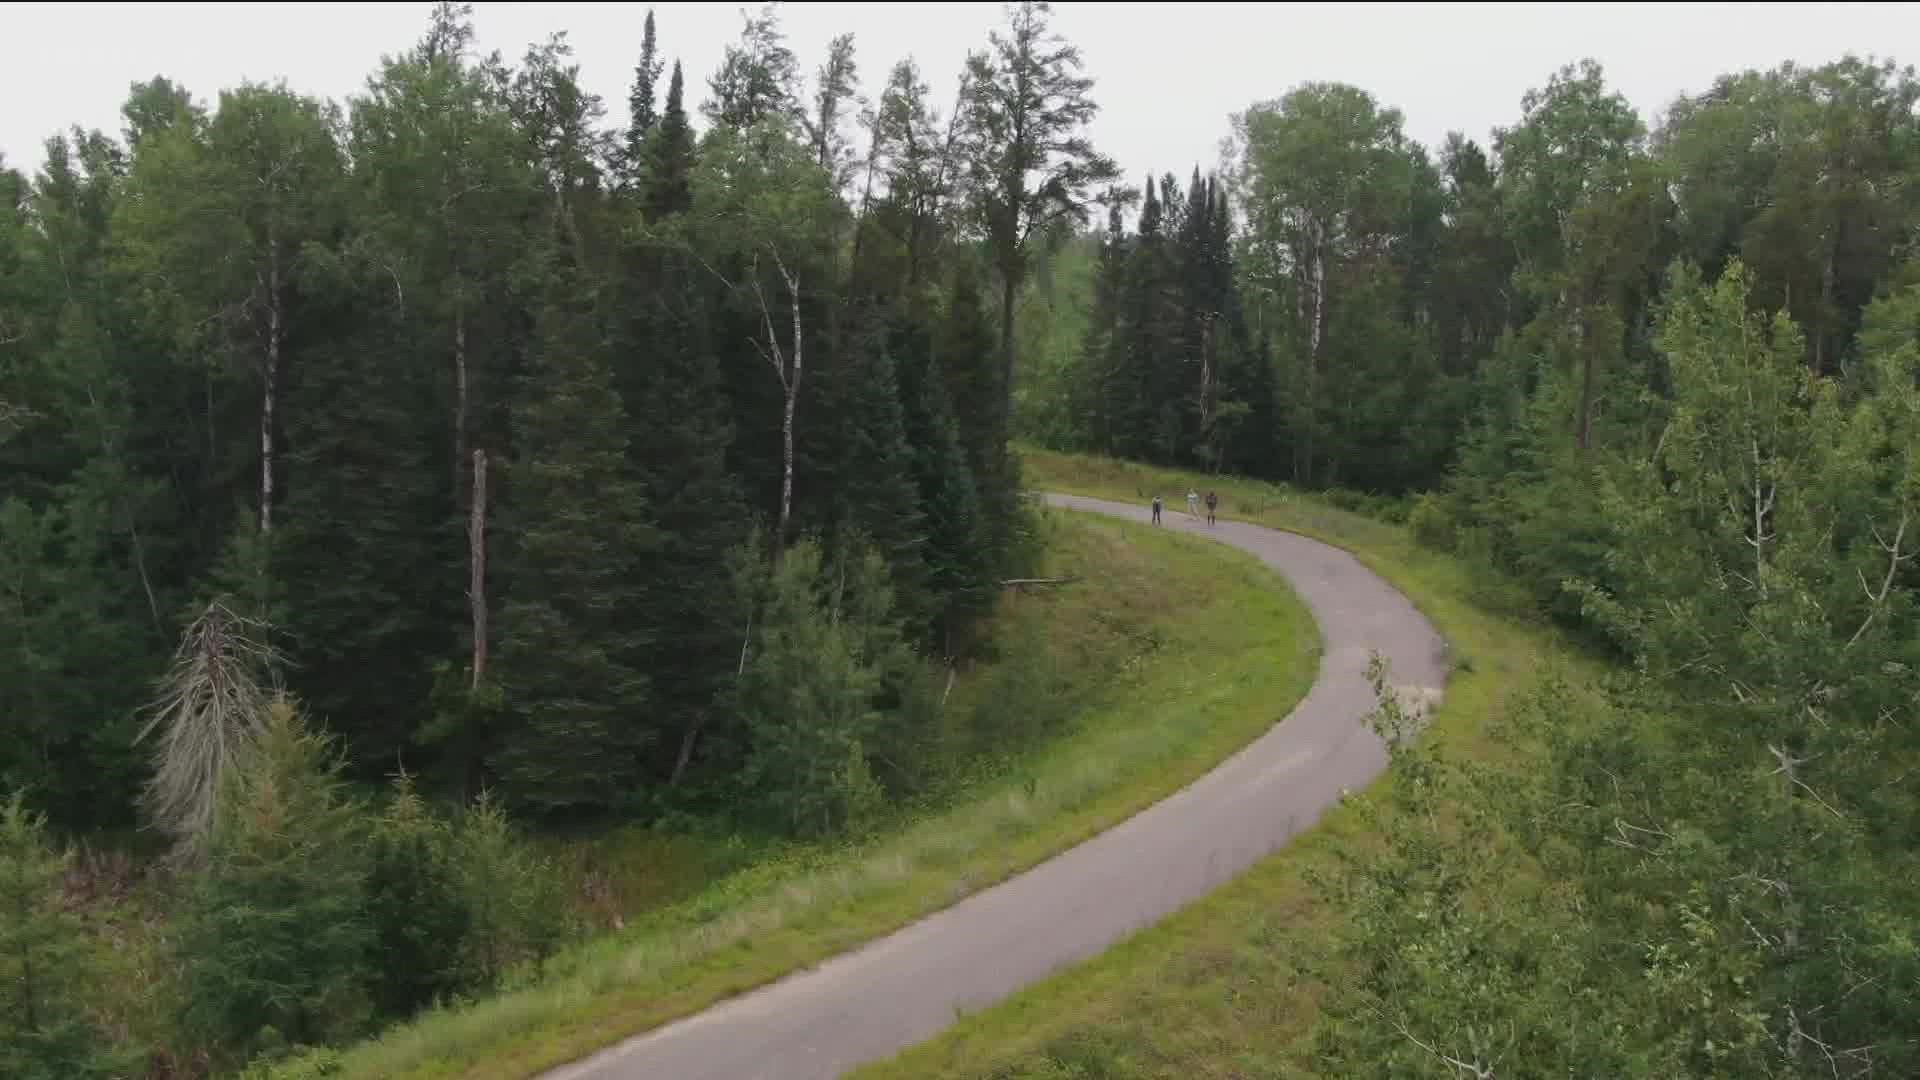 It's the state of Minnesota's longest trail at 115 miles long.